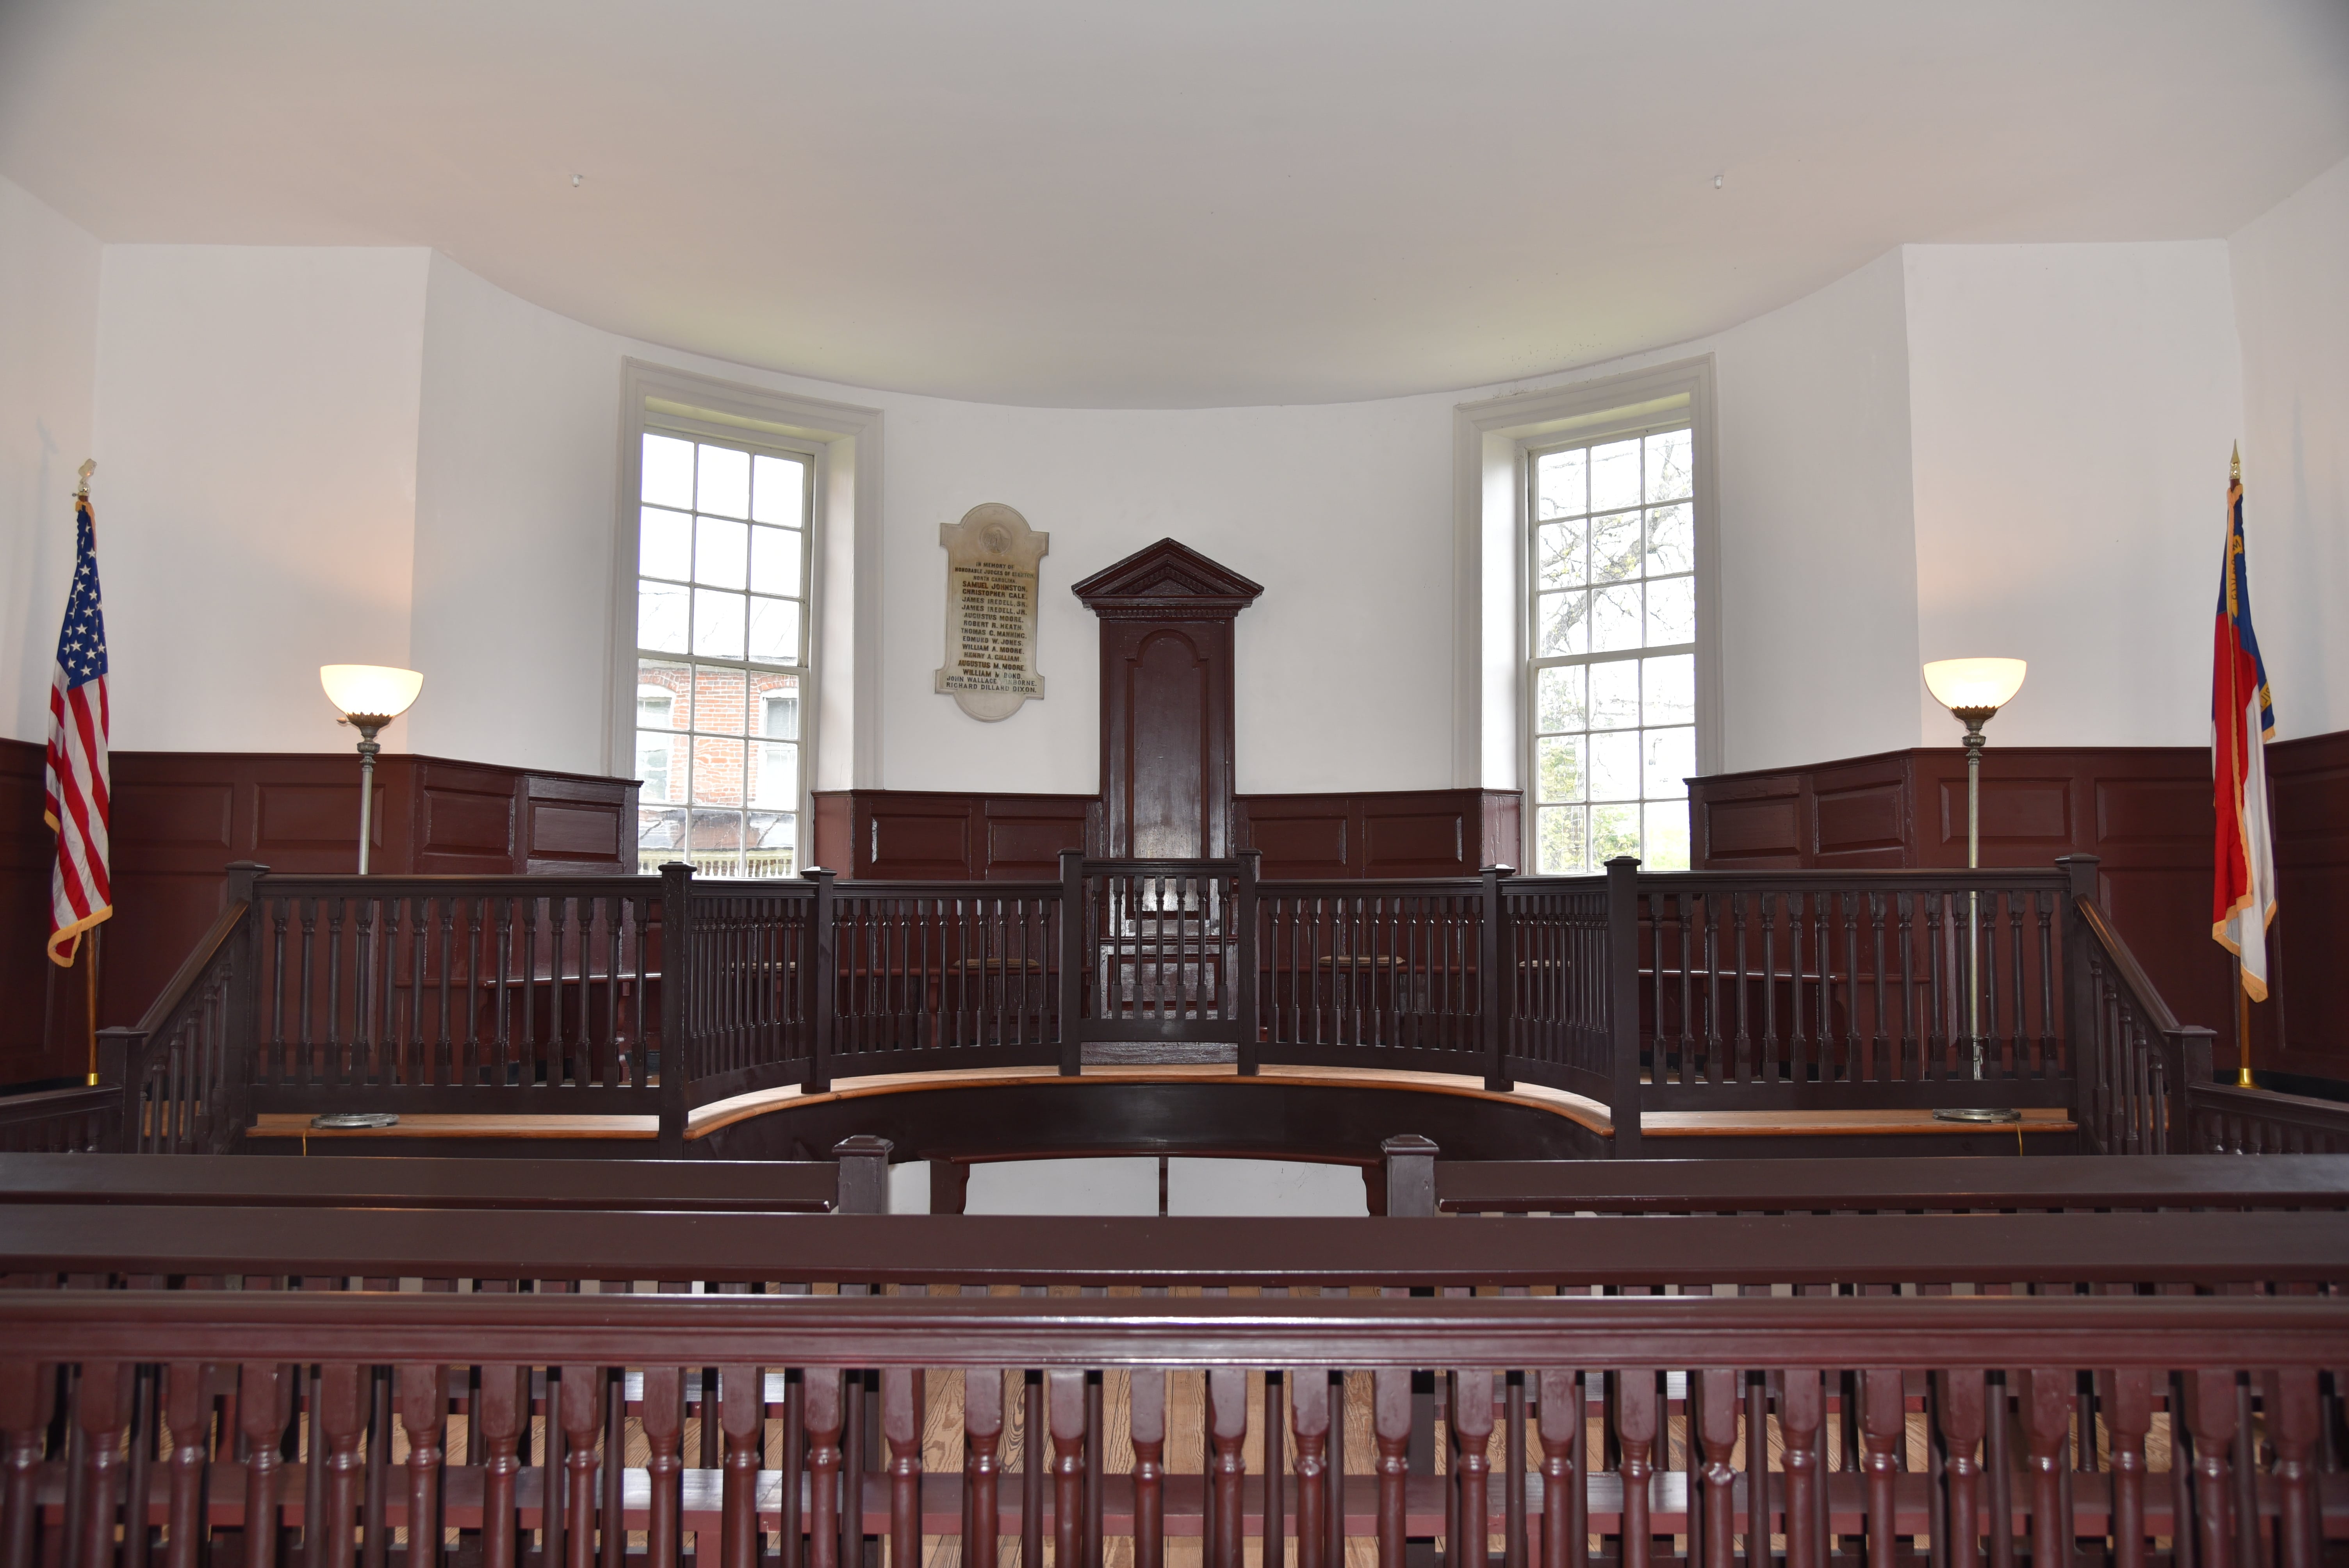 Interior of the historic Chowan County Courthouse